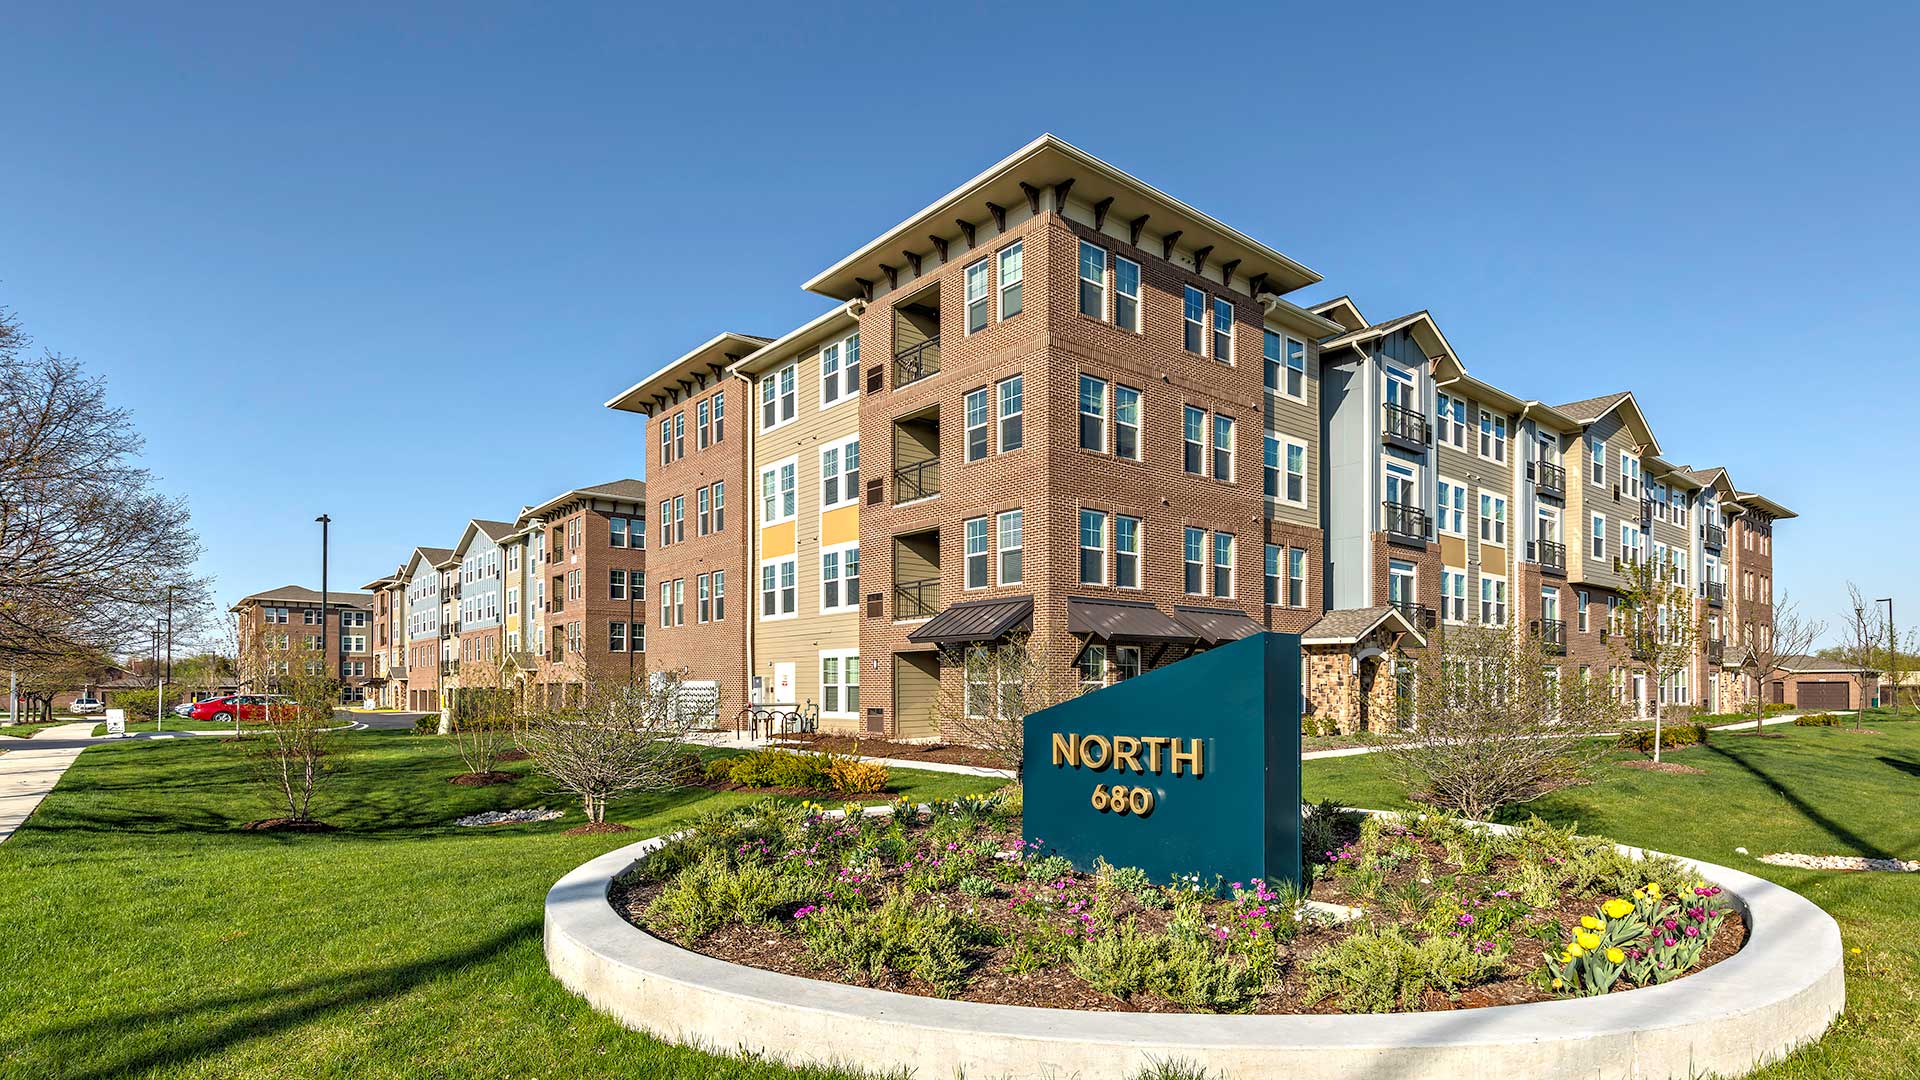 The main entrance sign for North 680 is blue with an angled top and North 680 in gold lettering. The apartment building is seen behind on a clear day.